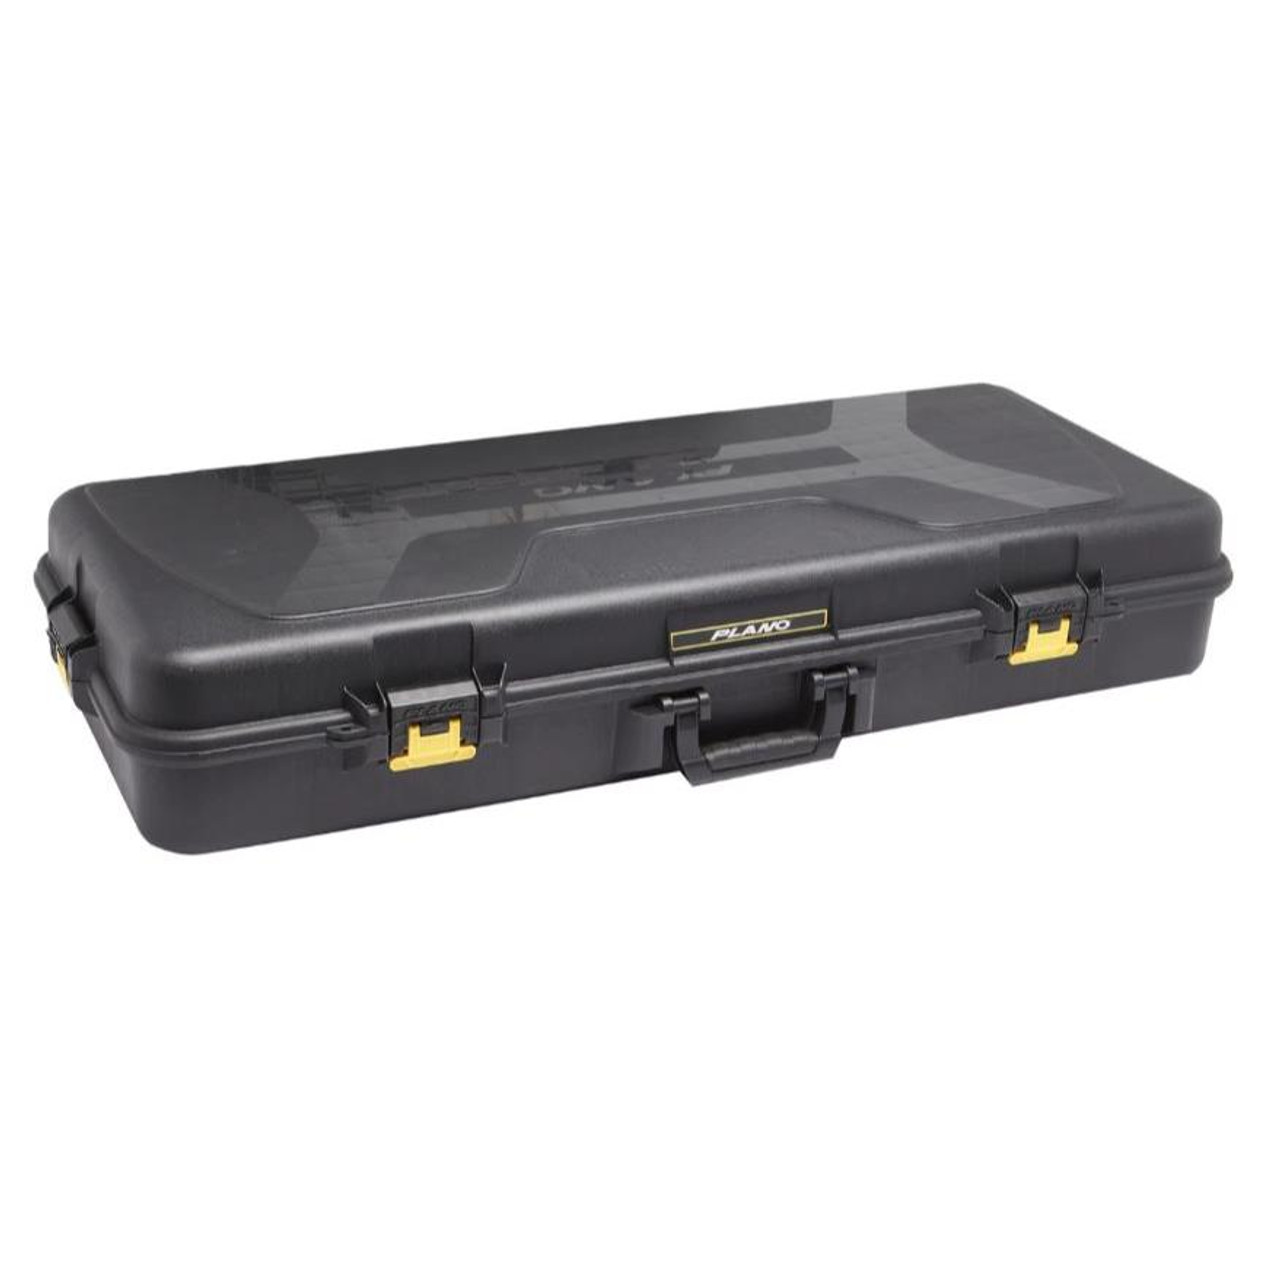 Plano Element Compound Bow Case - Presleys Outdoors